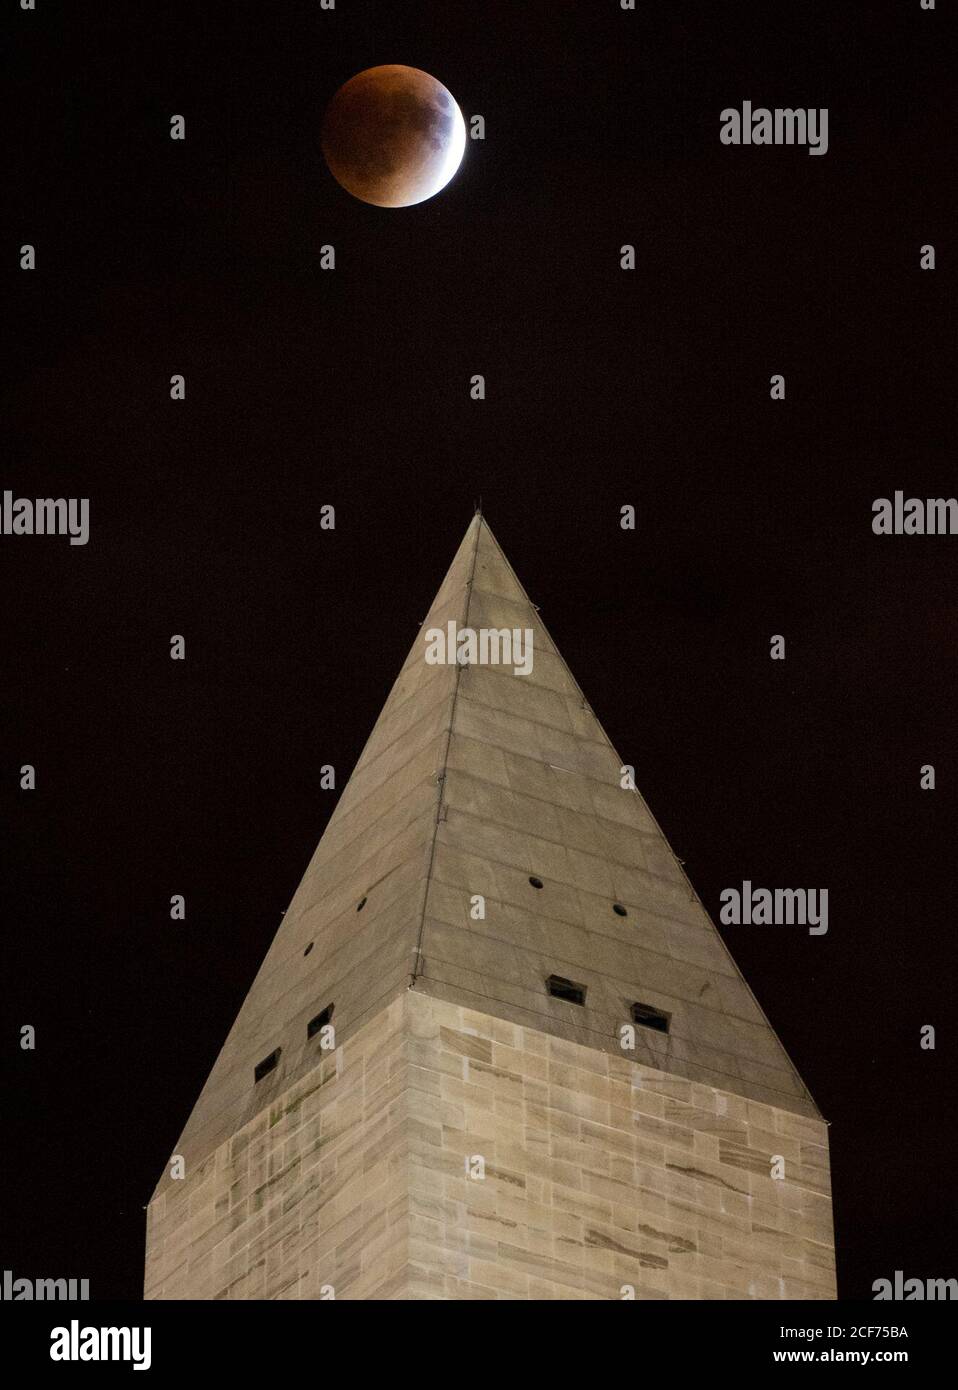 A perigee full moon, or supermoon, is seen behind the Washington Monument during a total lunar eclipse on Sunday, September 27, 2015, in Washington, DC. The combination of a supermoon and total lunar eclipse last occurred in 1982 and will not happen again until 2033.  Photo Credit: (NASA/Aubrey Gemignani) Stock Photo